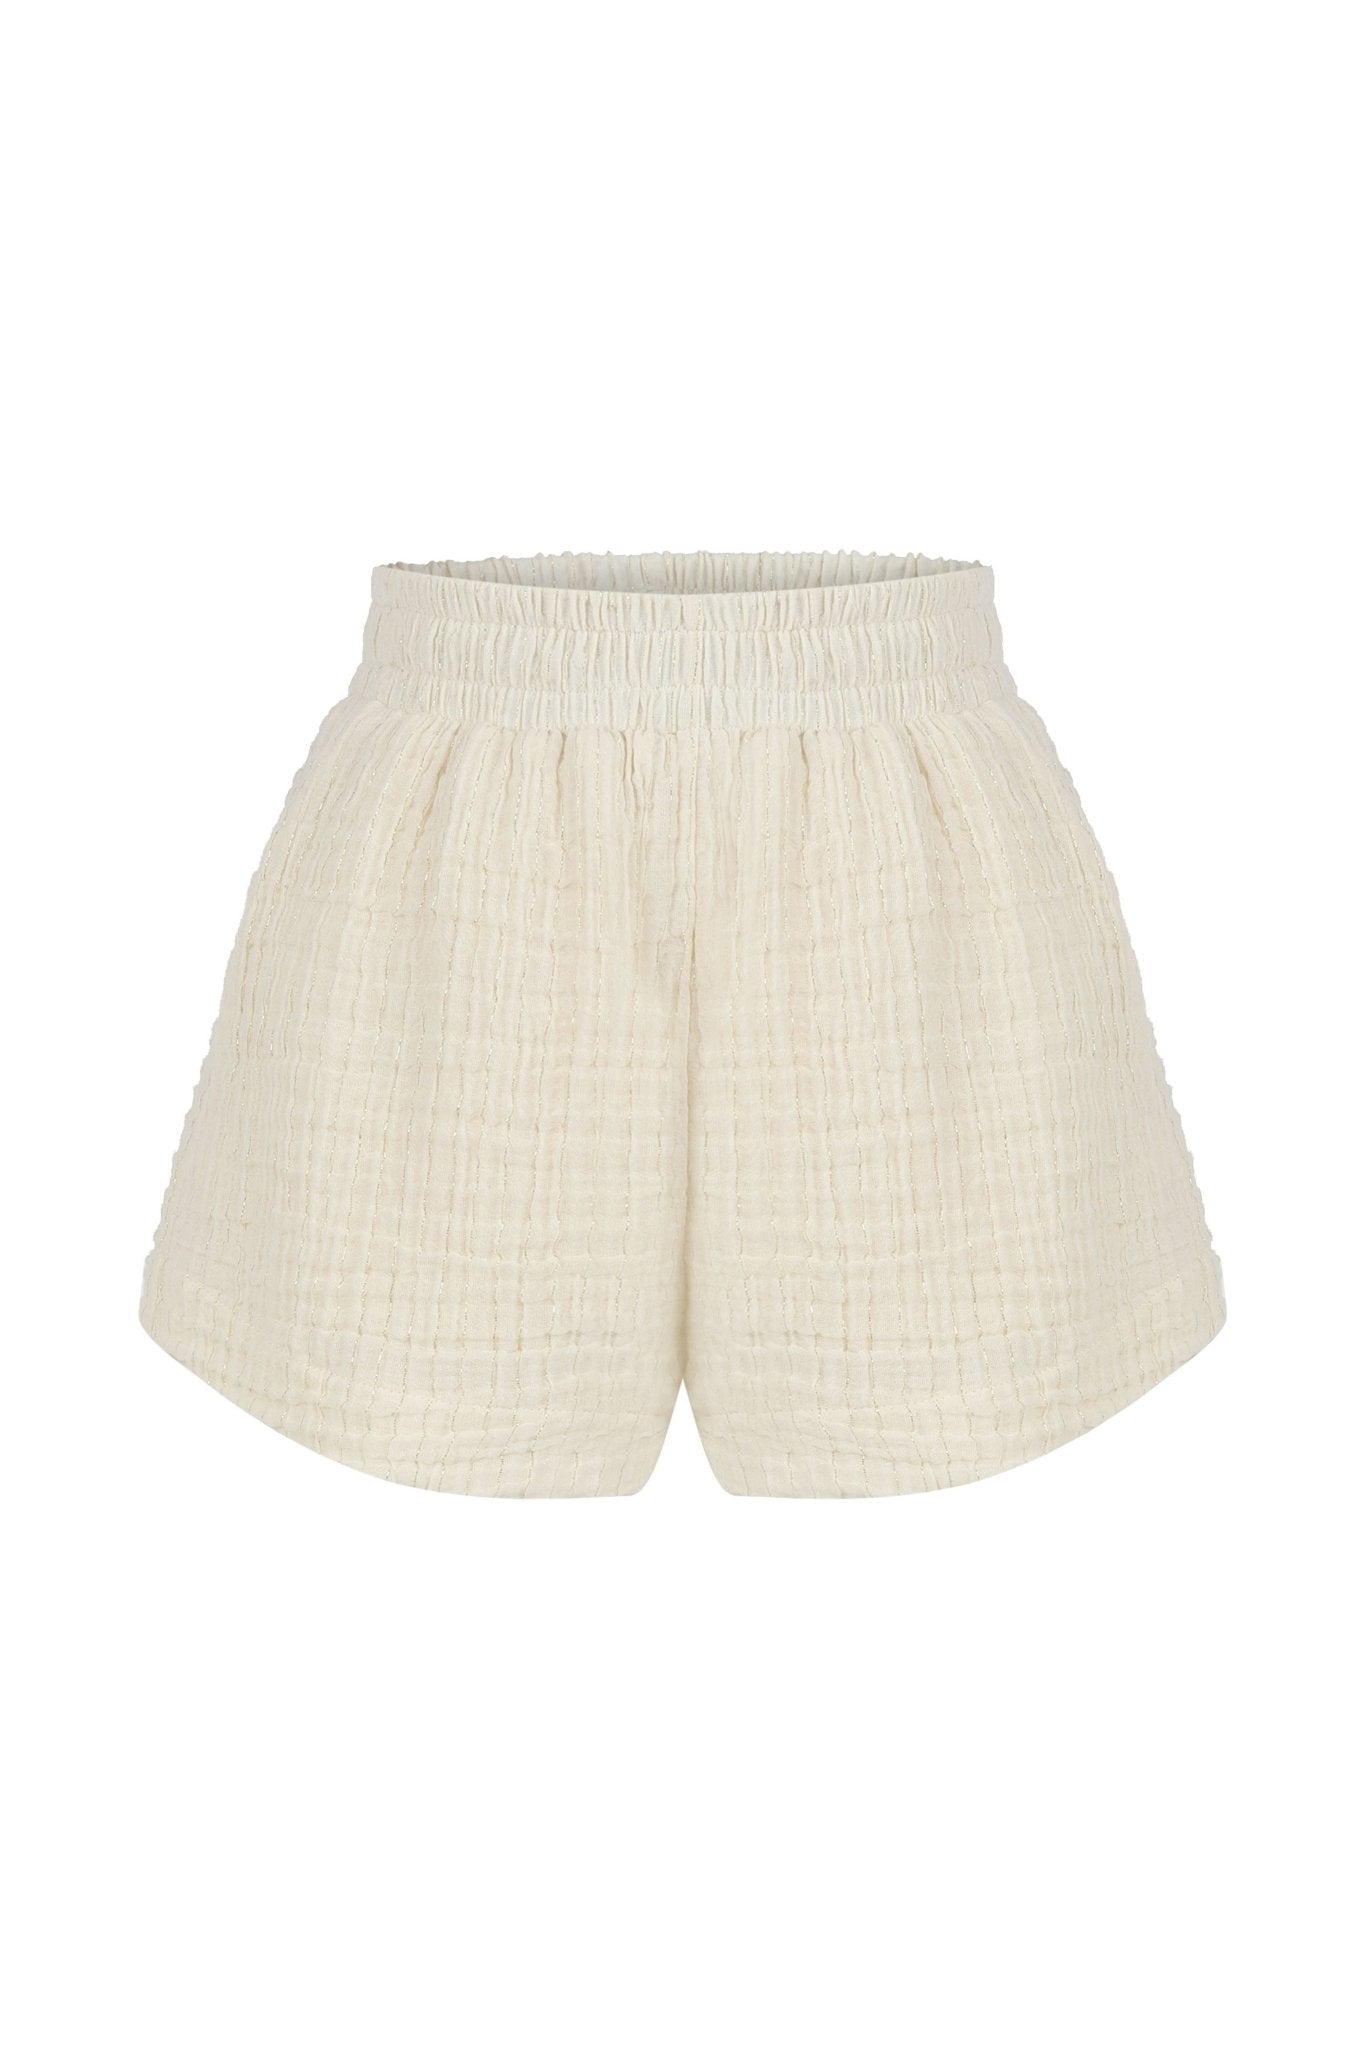 Echo Boy Short - Natural With Gold Stripes by The Handloom